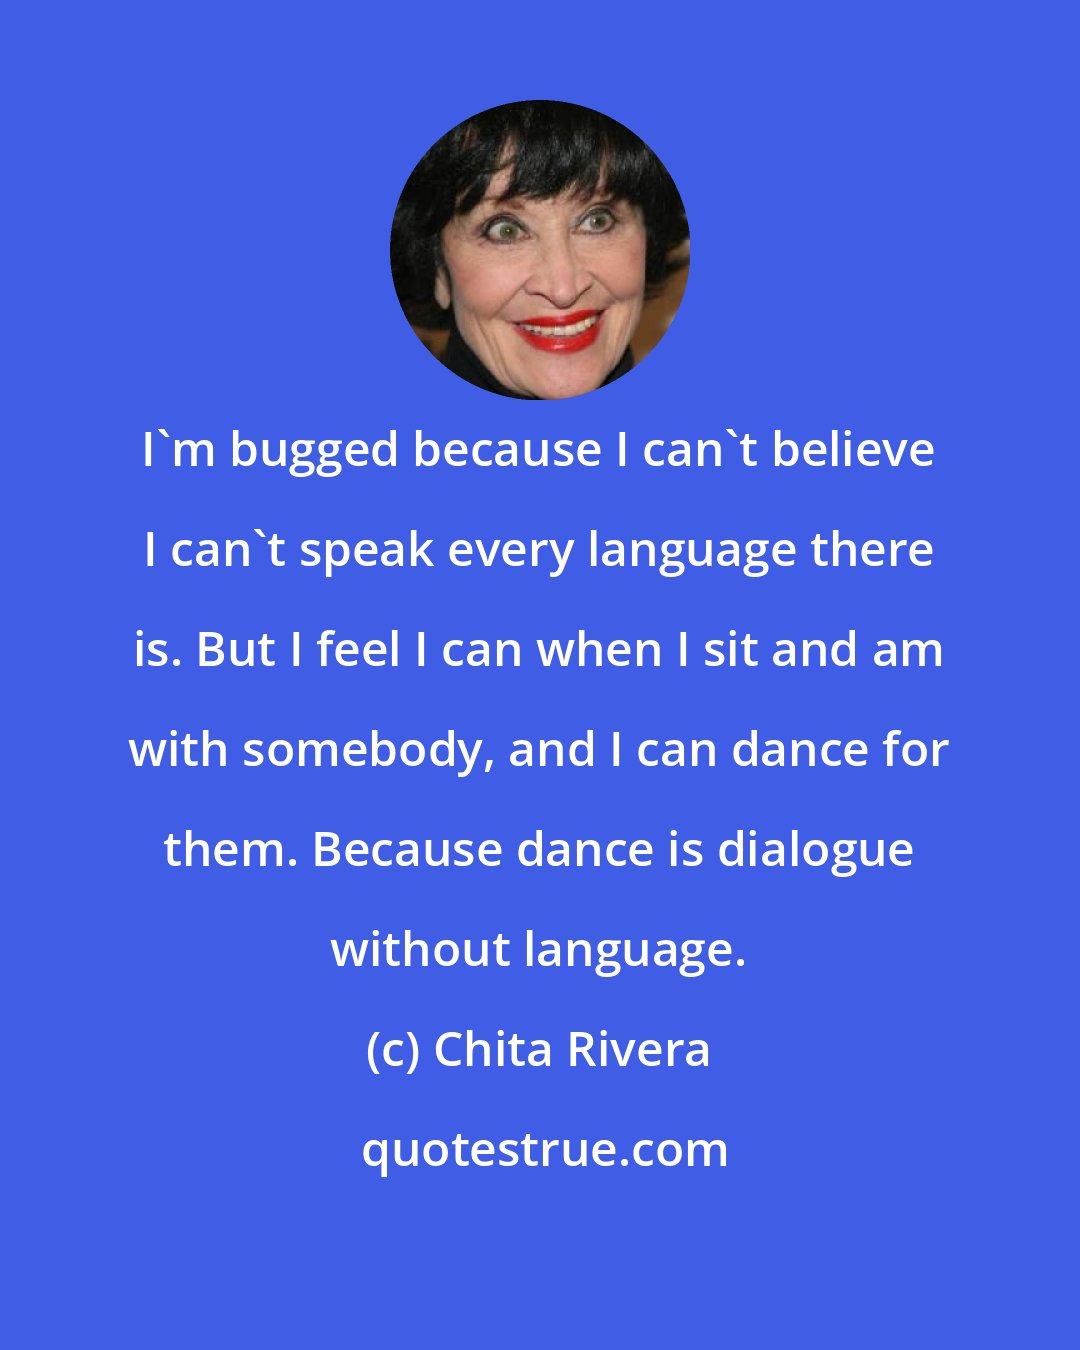 Chita Rivera: I'm bugged because I can't believe I can't speak every language there is. But I feel I can when I sit and am with somebody, and I can dance for them. Because dance is dialogue without language.